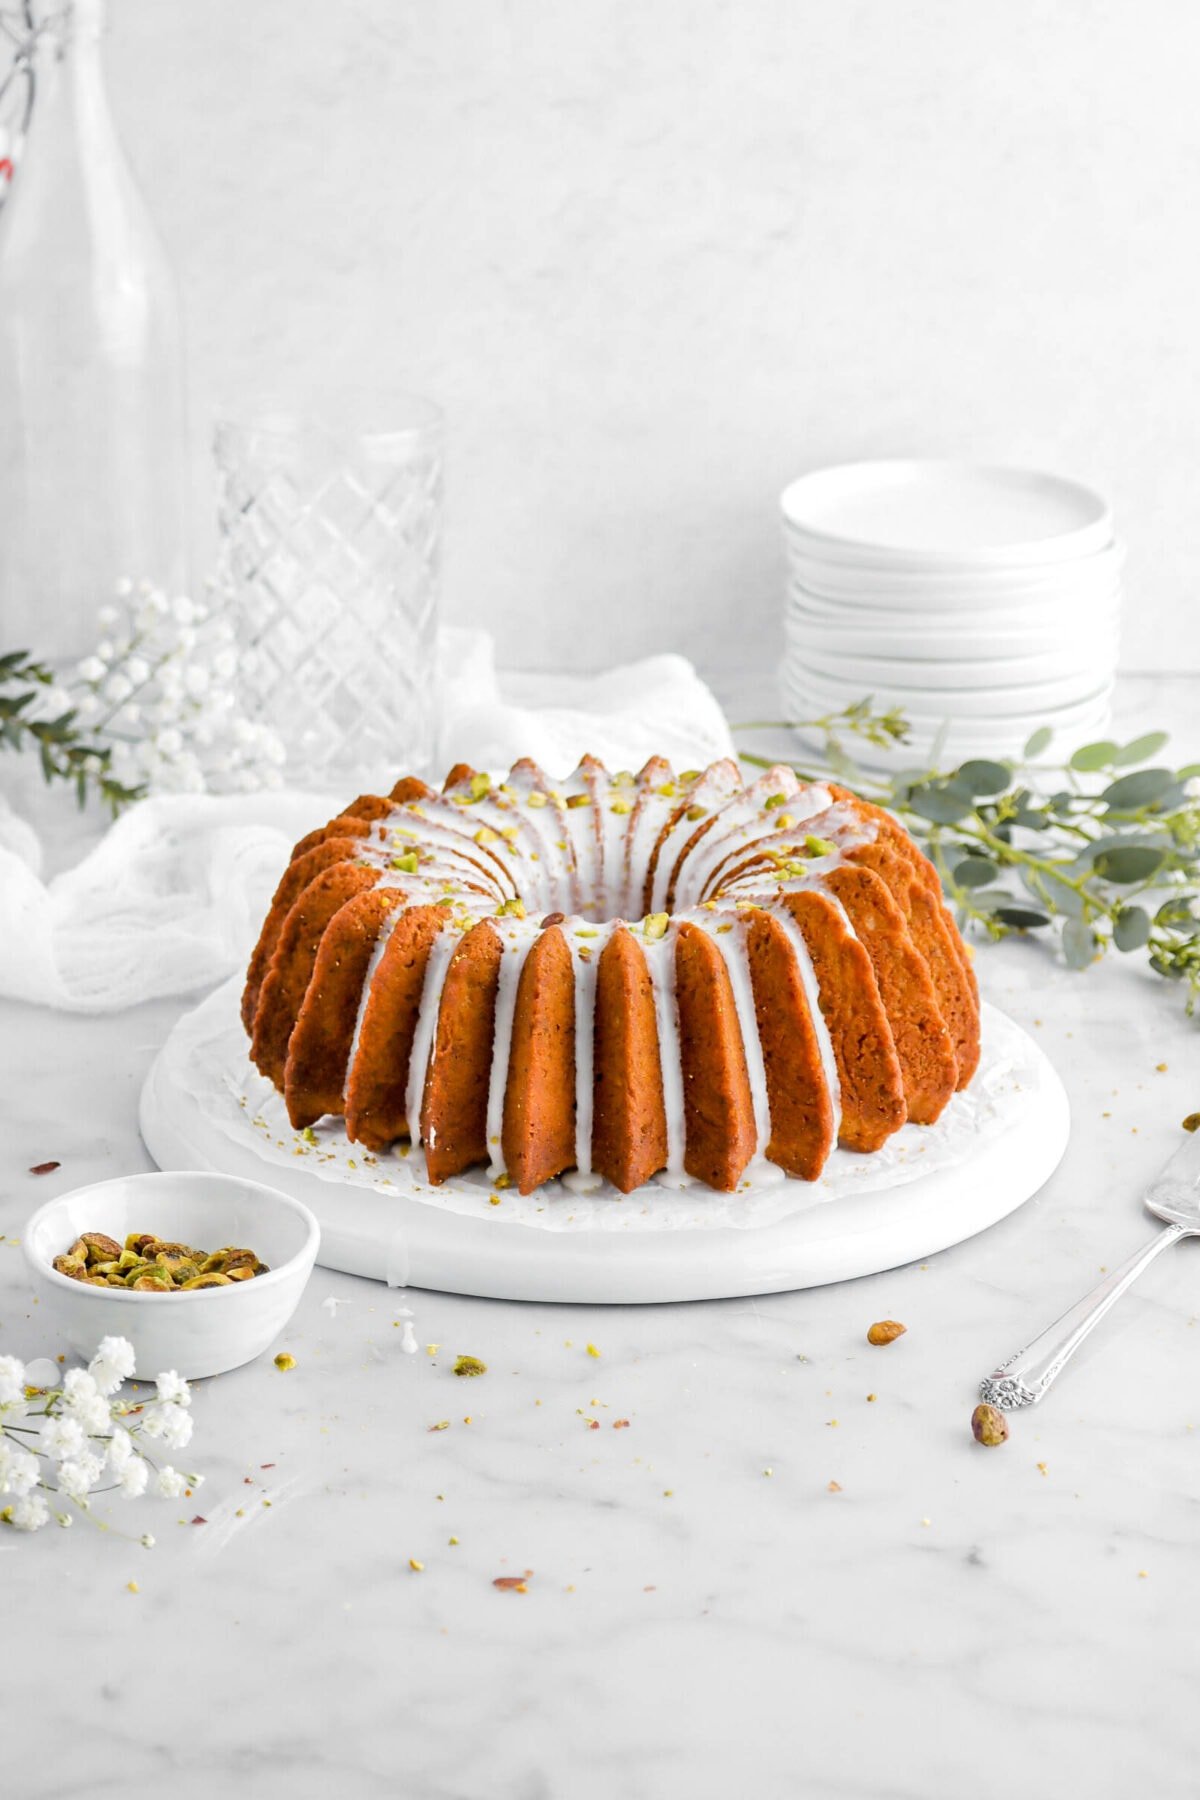 bundt cake on upside down white palte with icing on top and pistachios, with eucalyptus leaves behind, stack of plates, empty glasses, and white flowers.